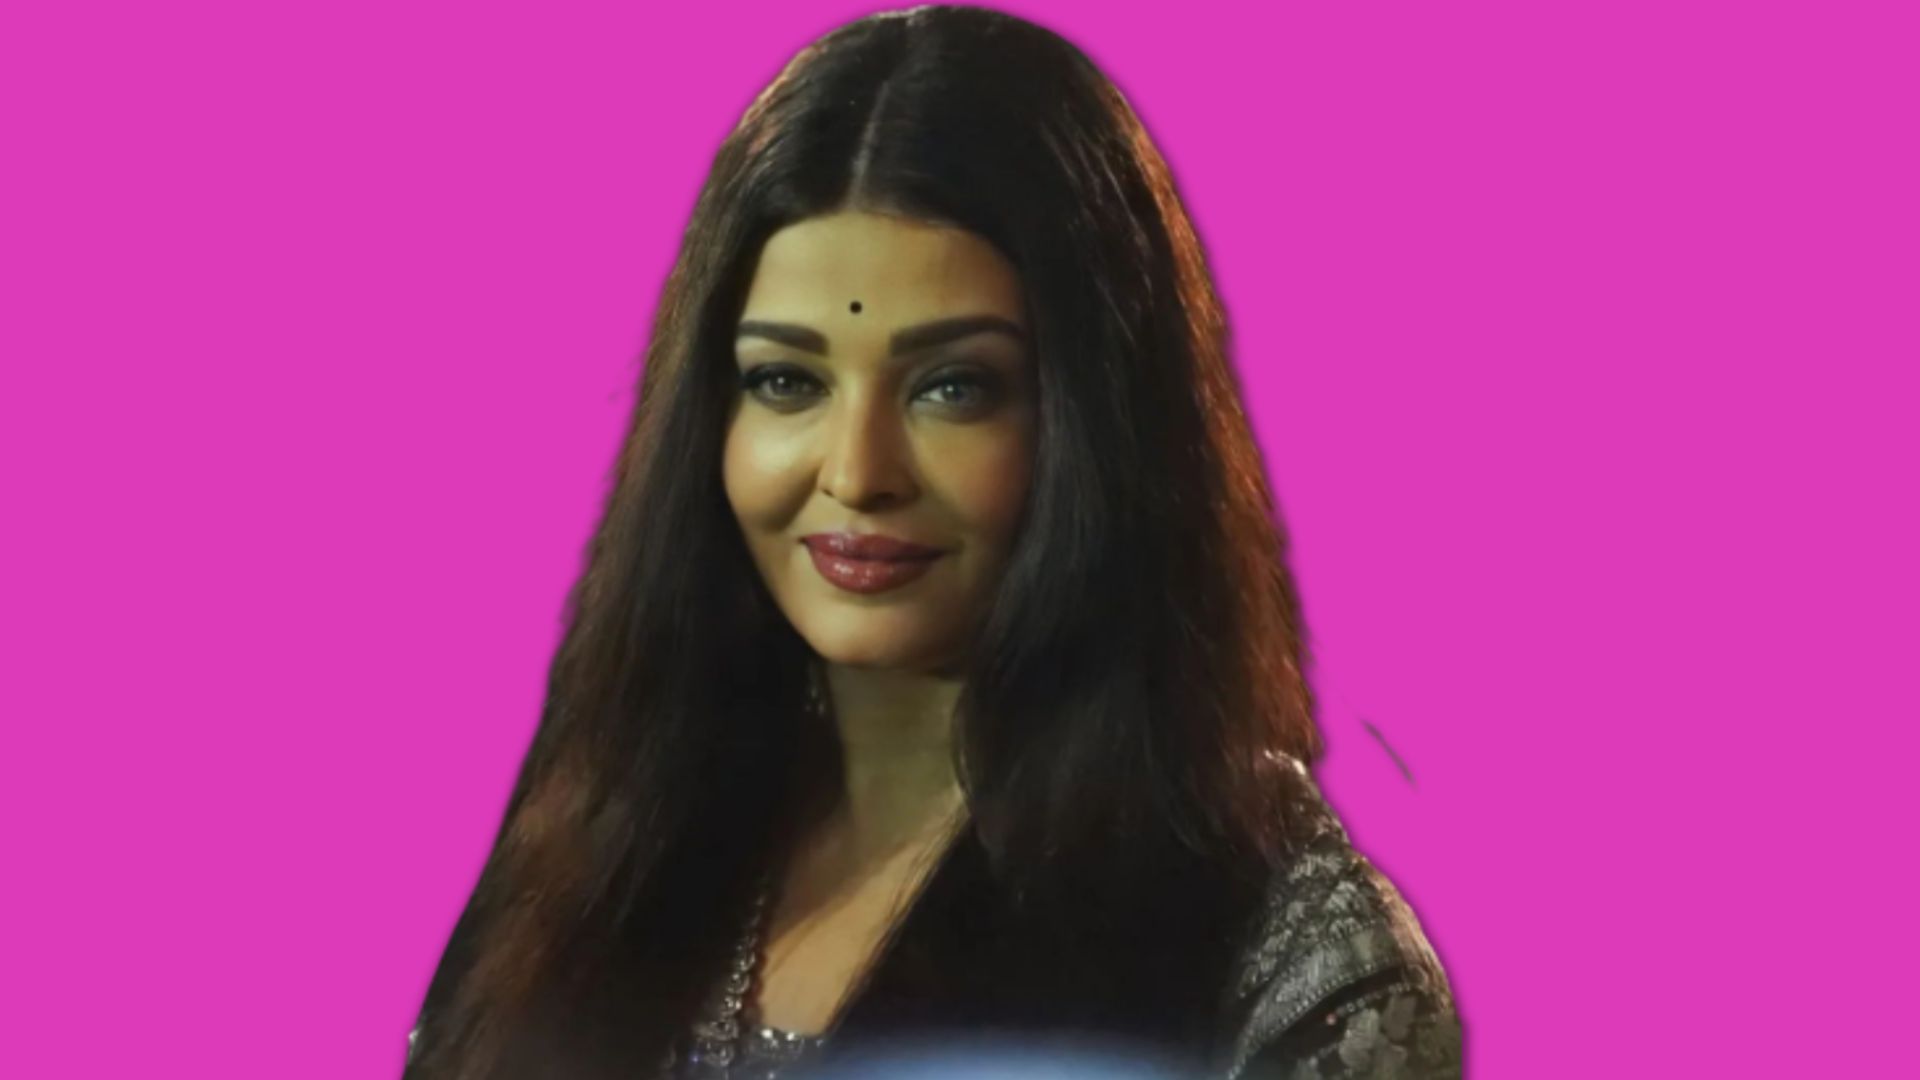 Aishwarya Rai Bachchan Trolled On Internet For Her Looks During The ‘PS-1’ Trailer Launch. Stop, Her Beauty Doesn’t Need Your Validation!